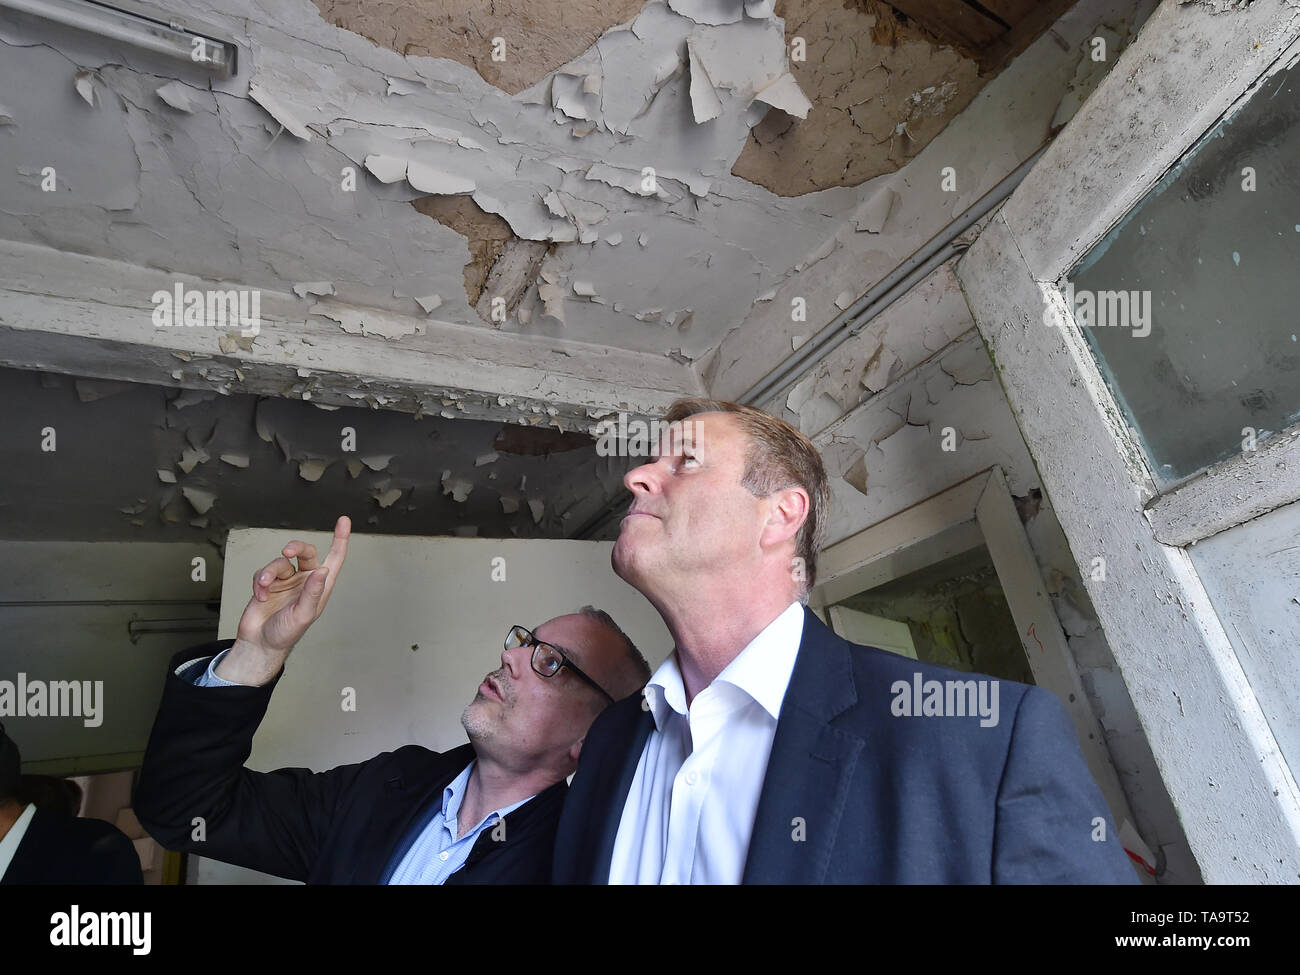 Caputh, Germany. 23rd May, 2019. Christoph Martin Vogtherr (l), General Director SPSG, shows Christian Görke (Die Linke, M), Minister of Finance of Brandenburg, damages in the old lodging house at Caputh Castle. The Stiftung Preußische Schlösser und Gärten Berlin-Brandenburg (SPSG) is currently preparing the plans for the restoration of the Logierhaus, which had been vacant since 1987. Credit: Bernd Settnik/dpa-Zentralbild/ZB/dpa/Alamy Live News Stock Photo